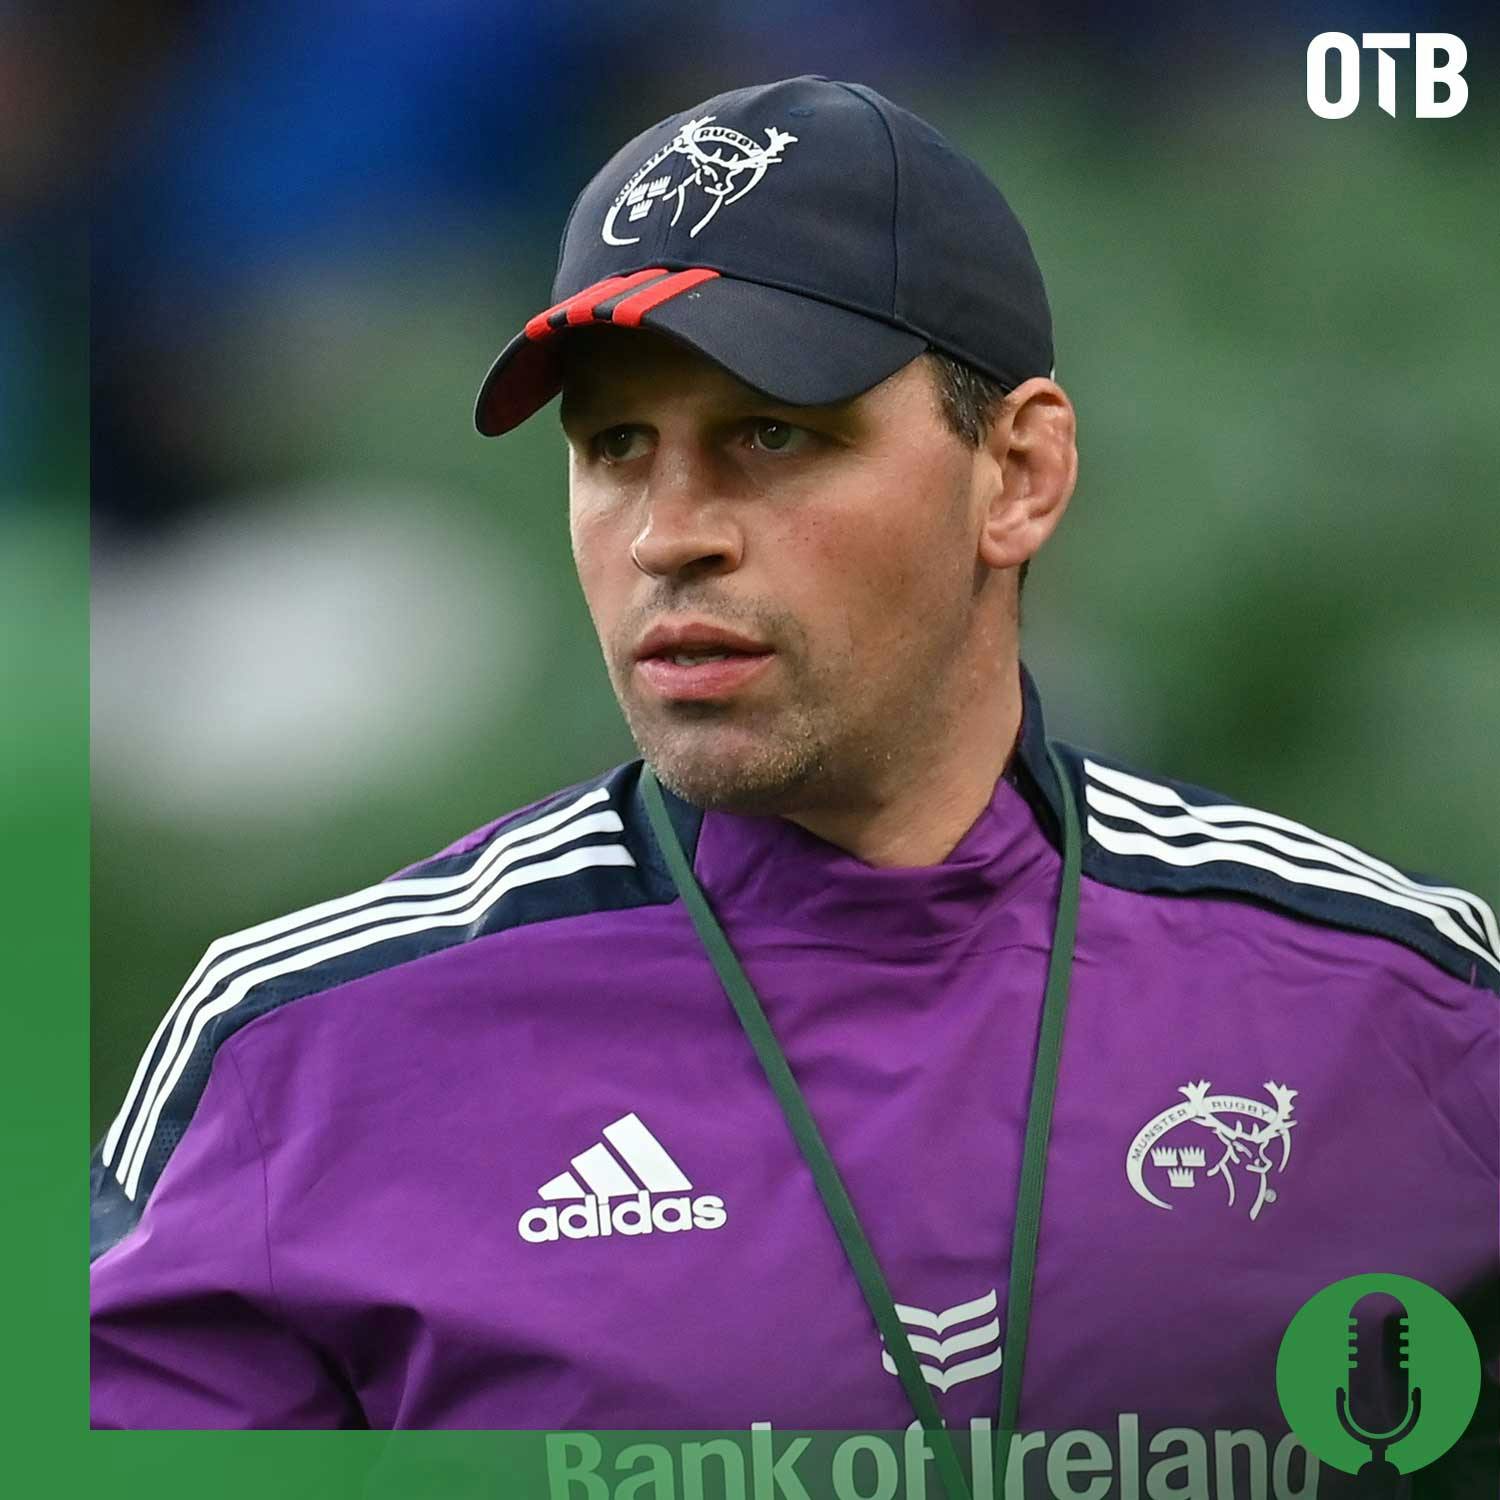 DENIS LEAMY | Munster’s rise back to the top | ’It means so much to represent where I’m from’